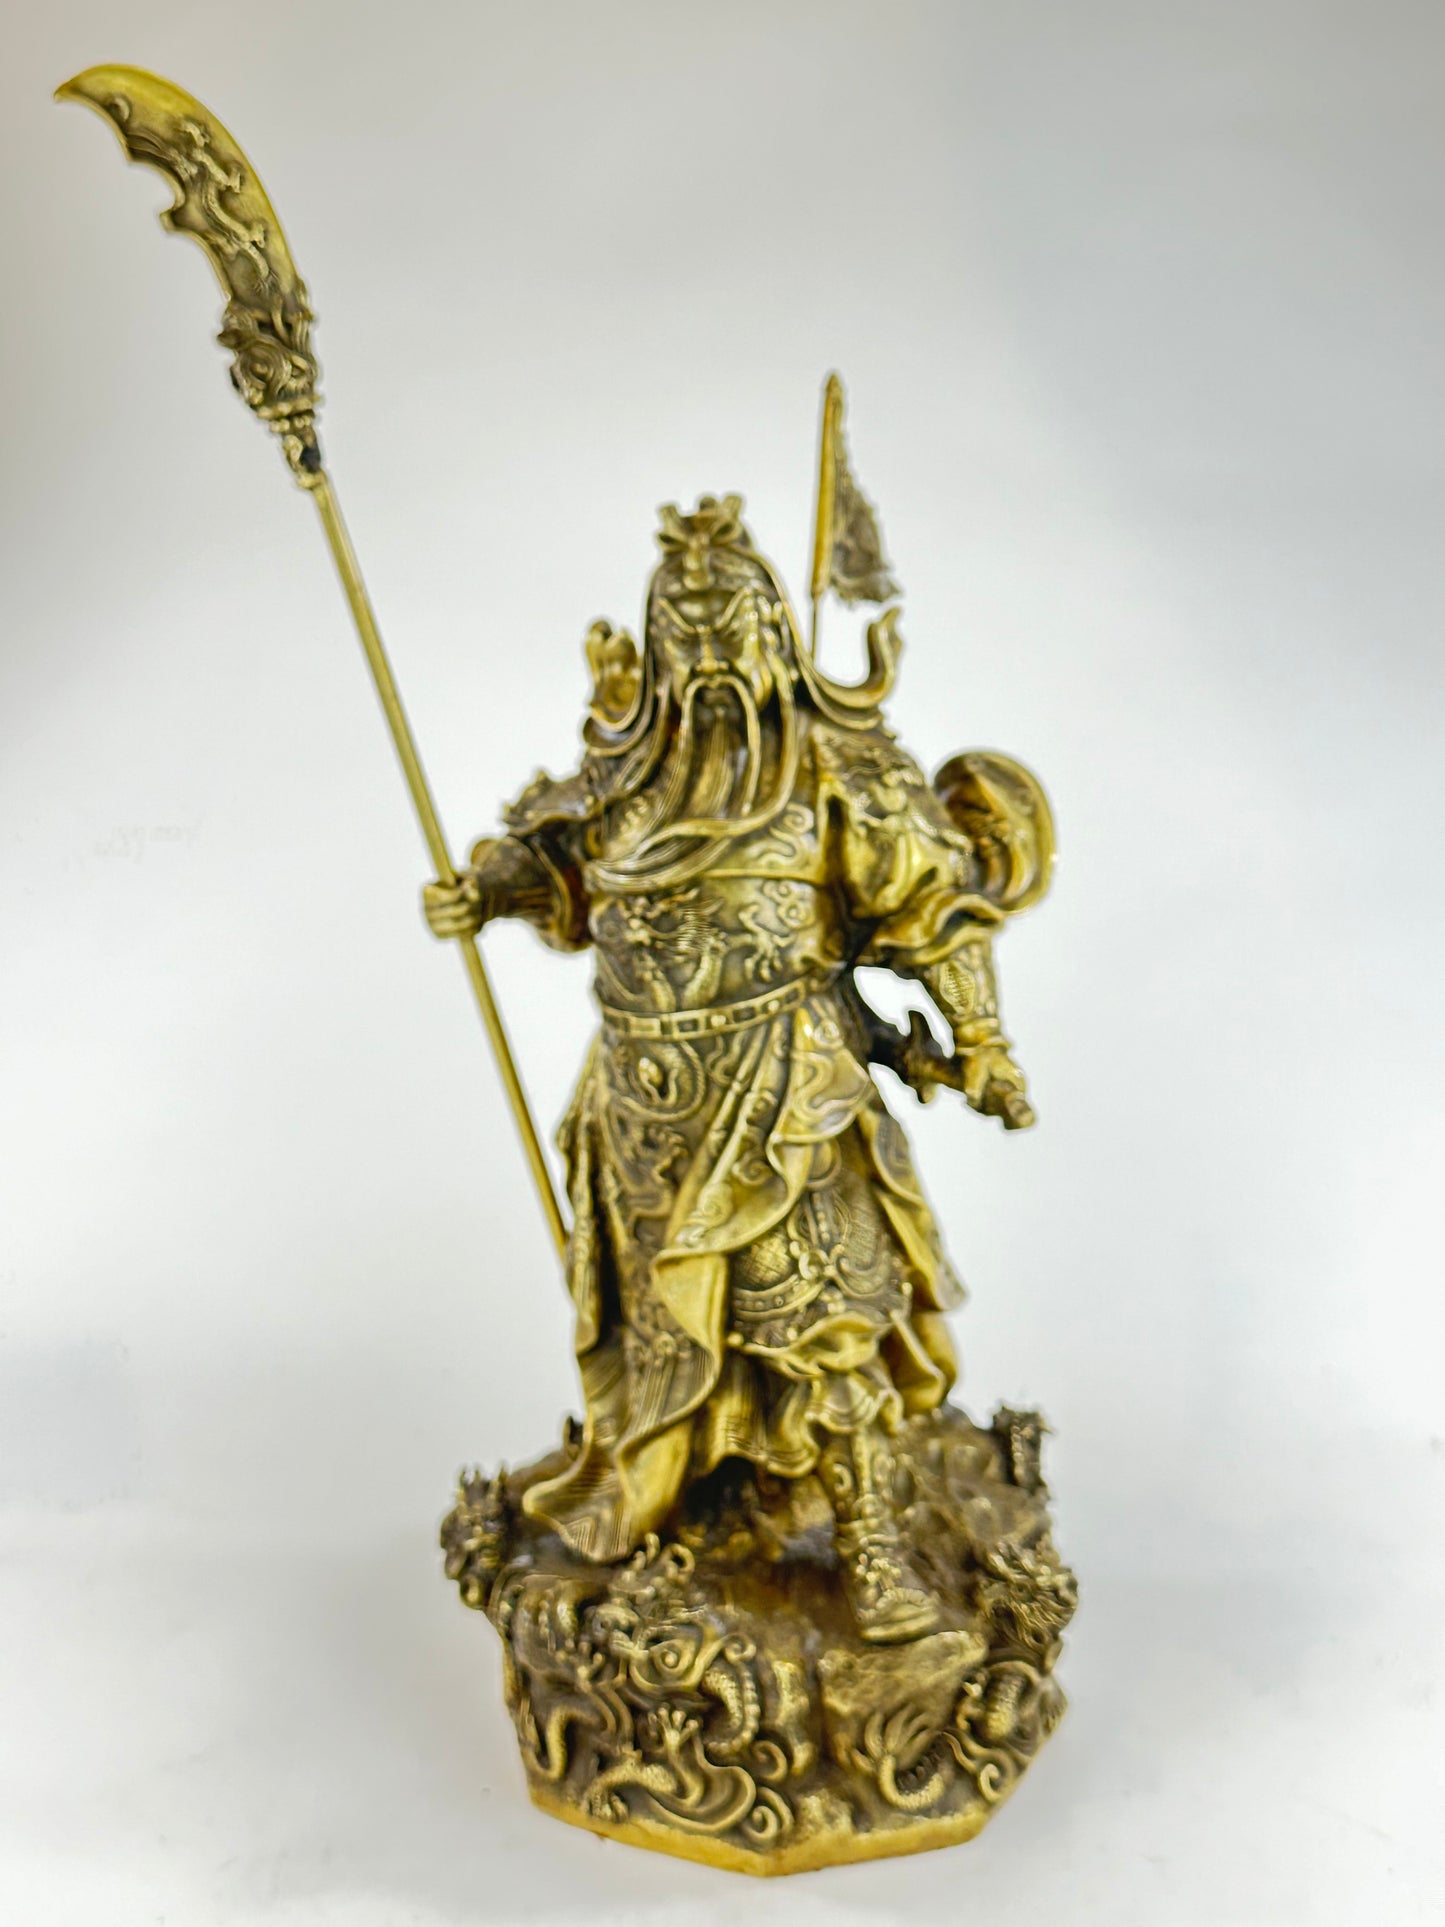 Vintage Chinese Brass Statue of Han Dynasty General Guan Yu 15.5"